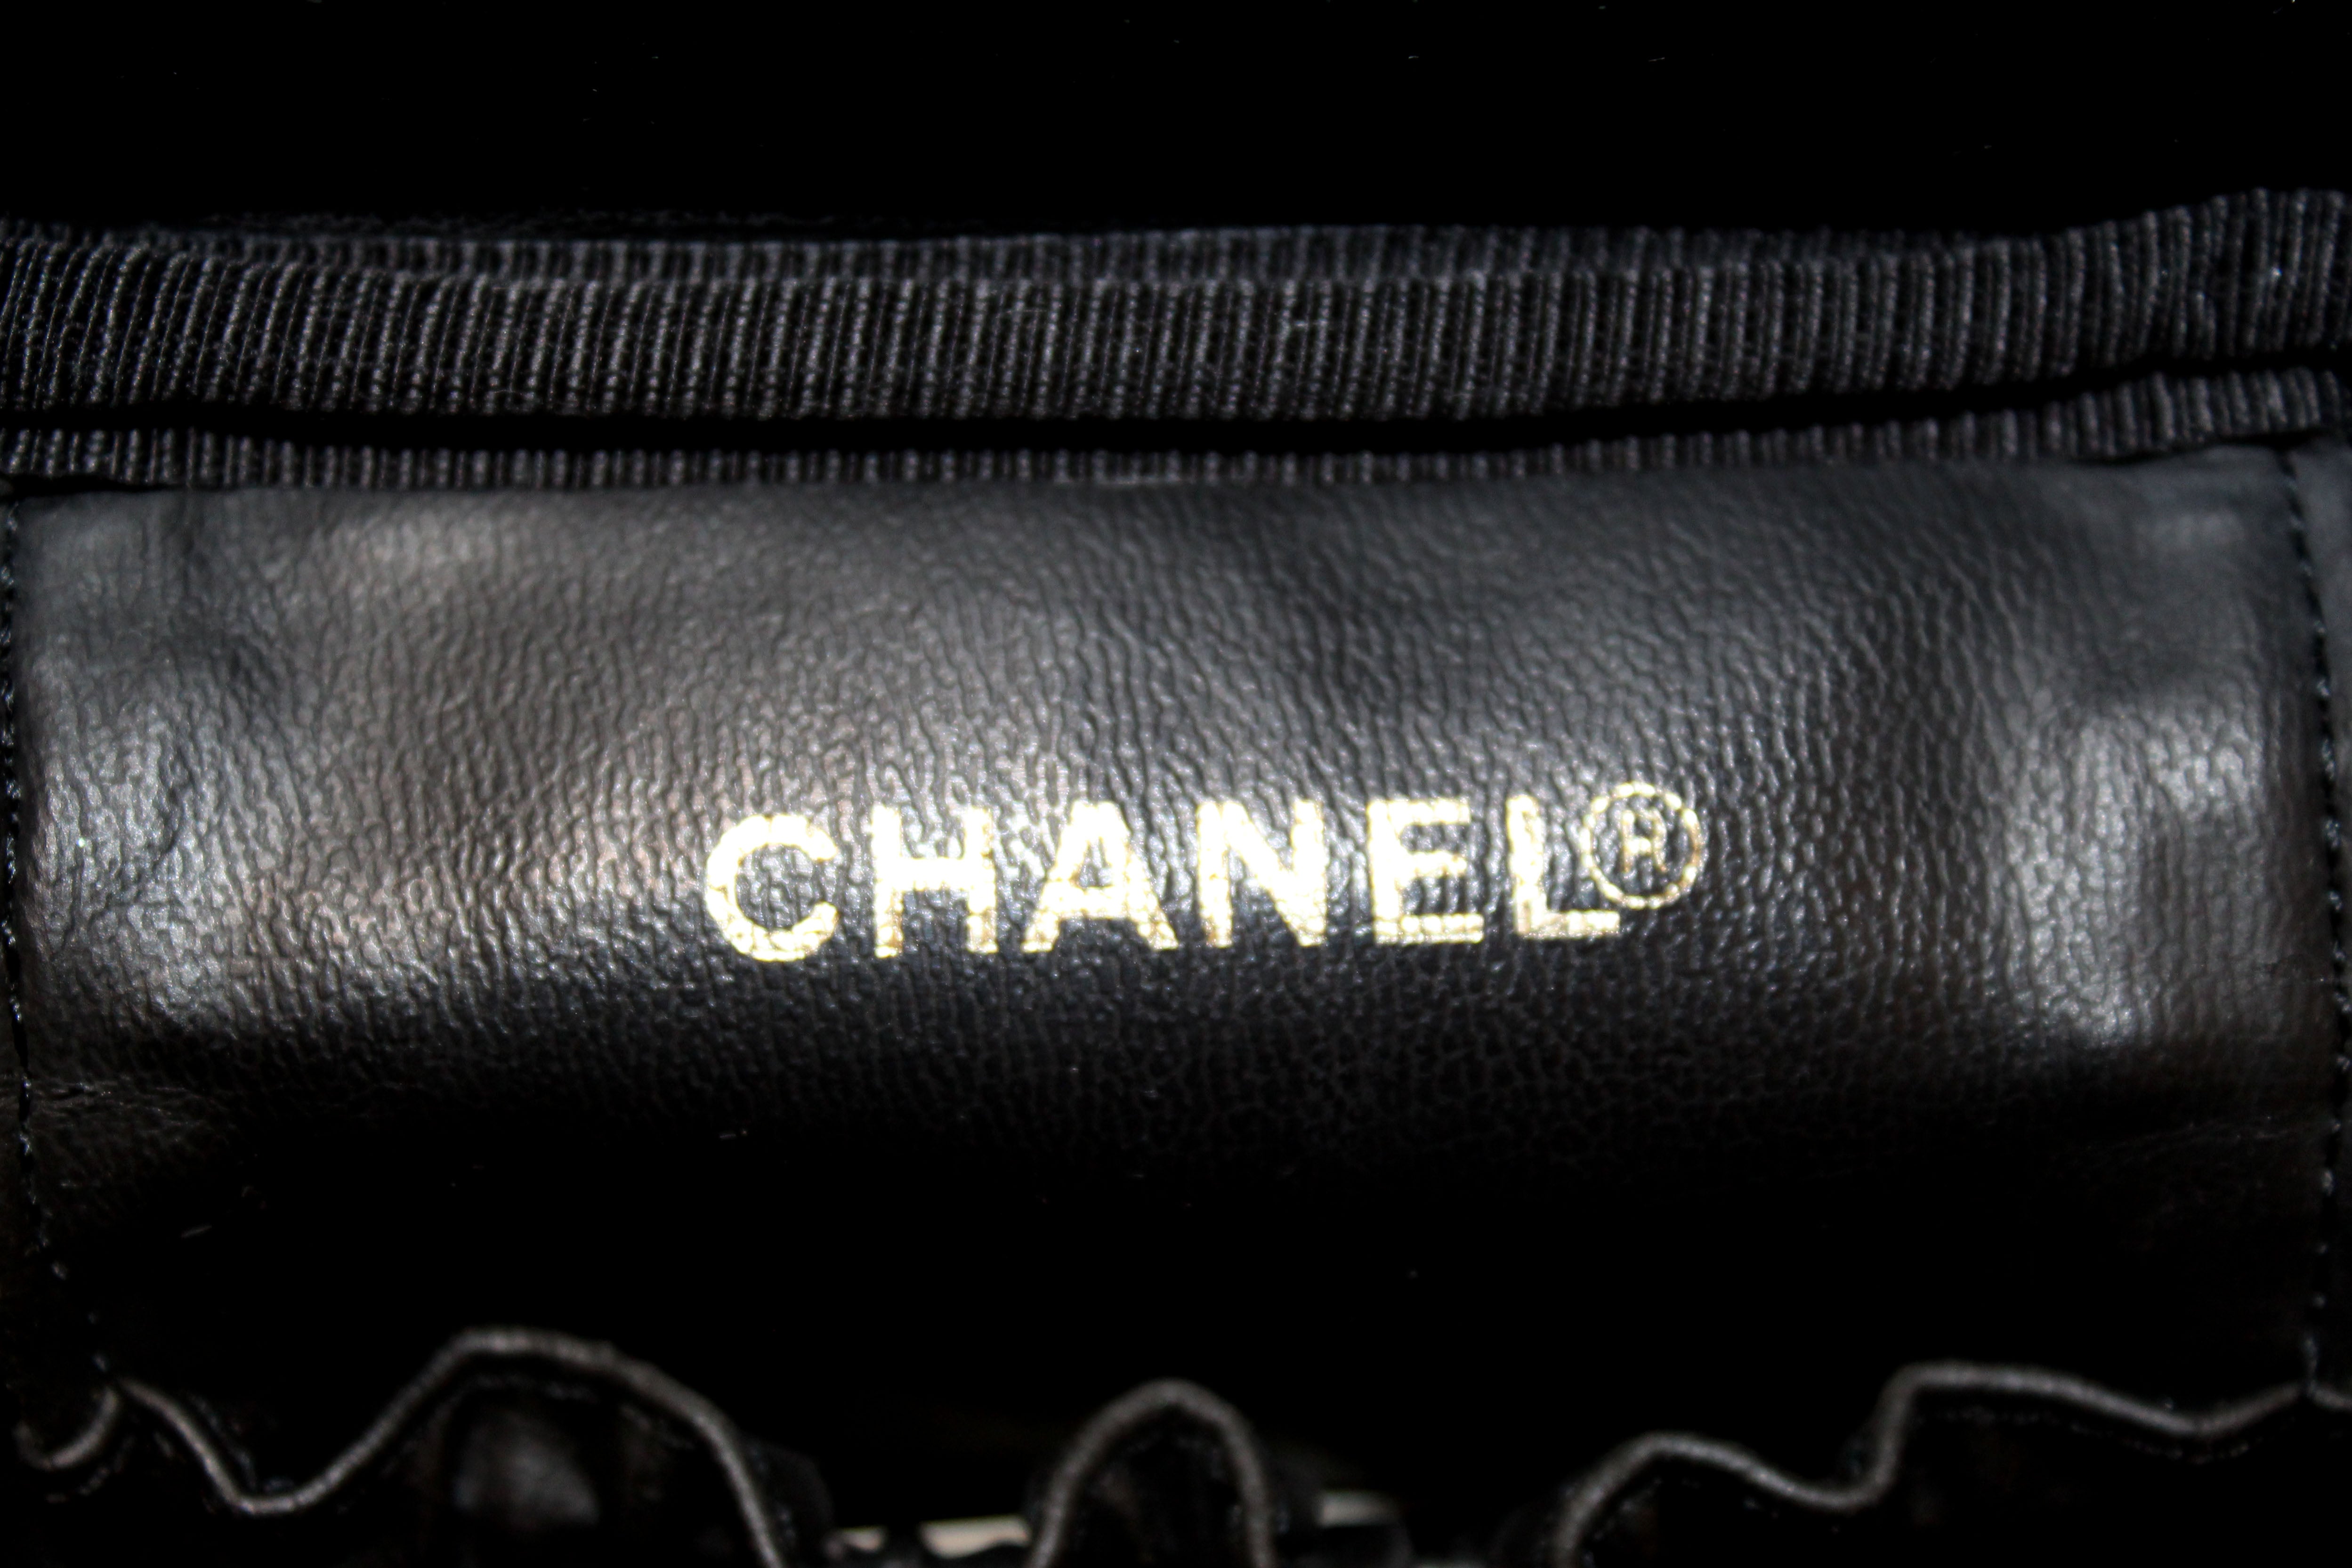 Authentic Chanel Vintage Black Caviar Leather Vanity Cosmetic Case